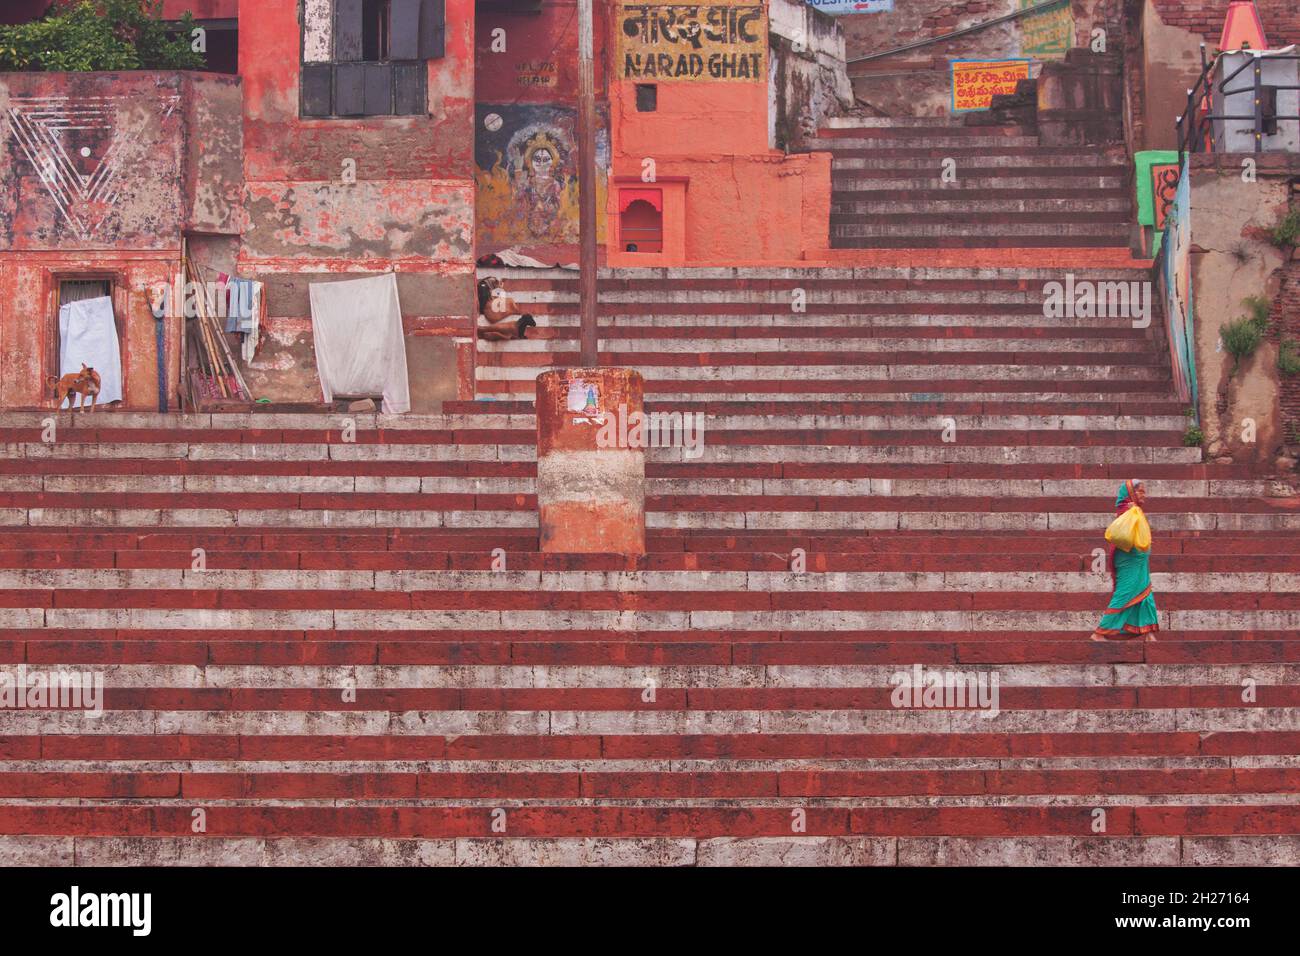 Varanasi, India– March 3, 2015: Unidentified woman making her  way shortly after dawn along the steps of Narad ghat above a Hindu bathing area Stock Photo